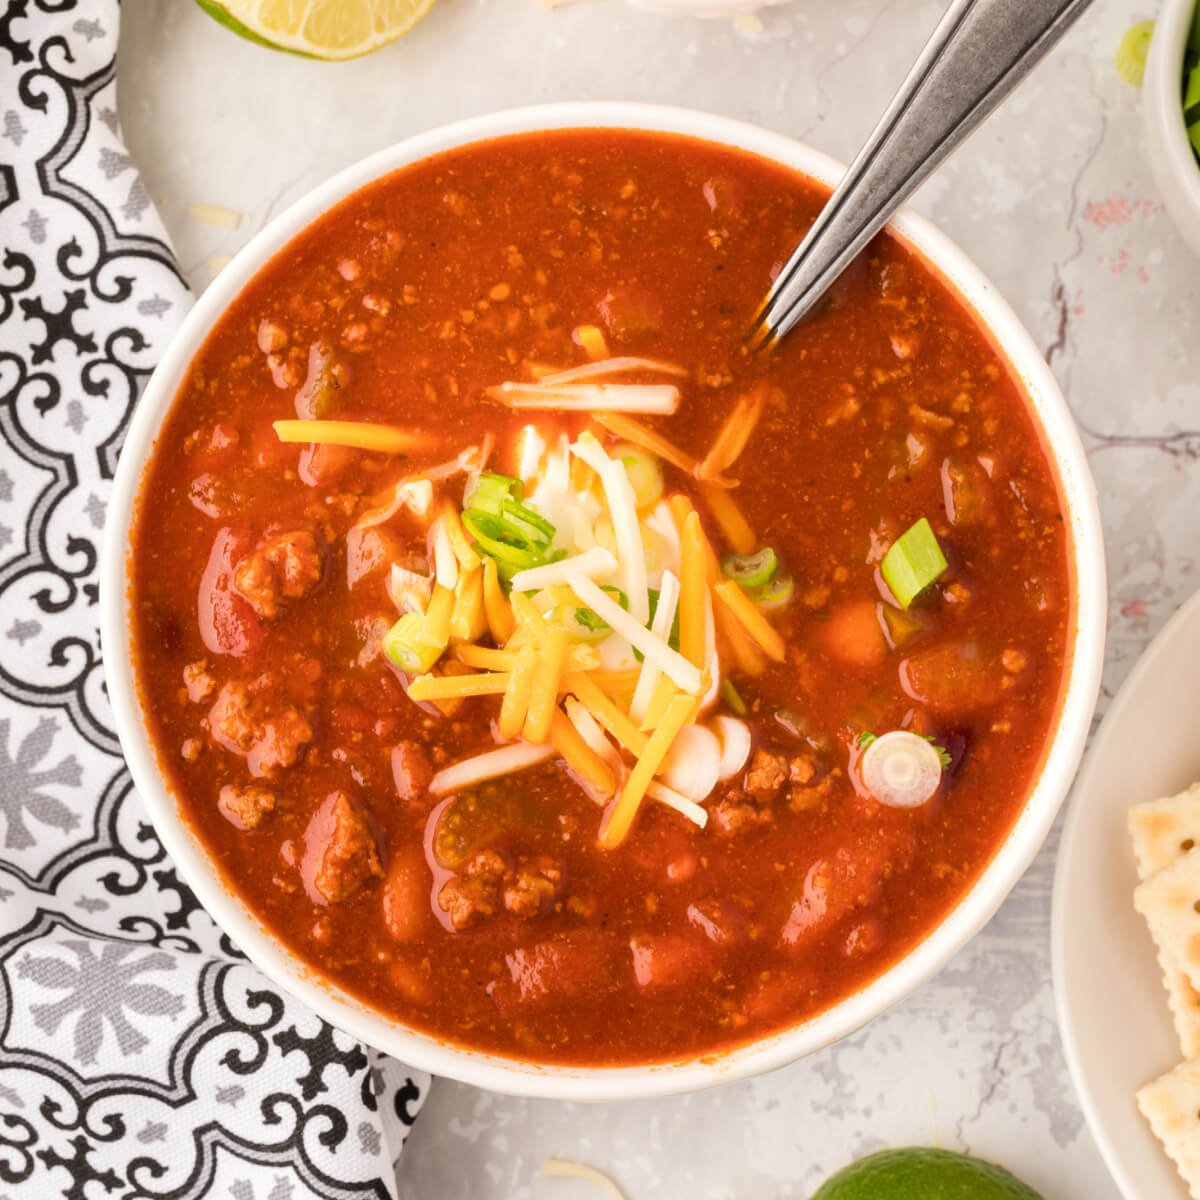 Wendy's Chili Will Soon Be Available in Grocery Stores